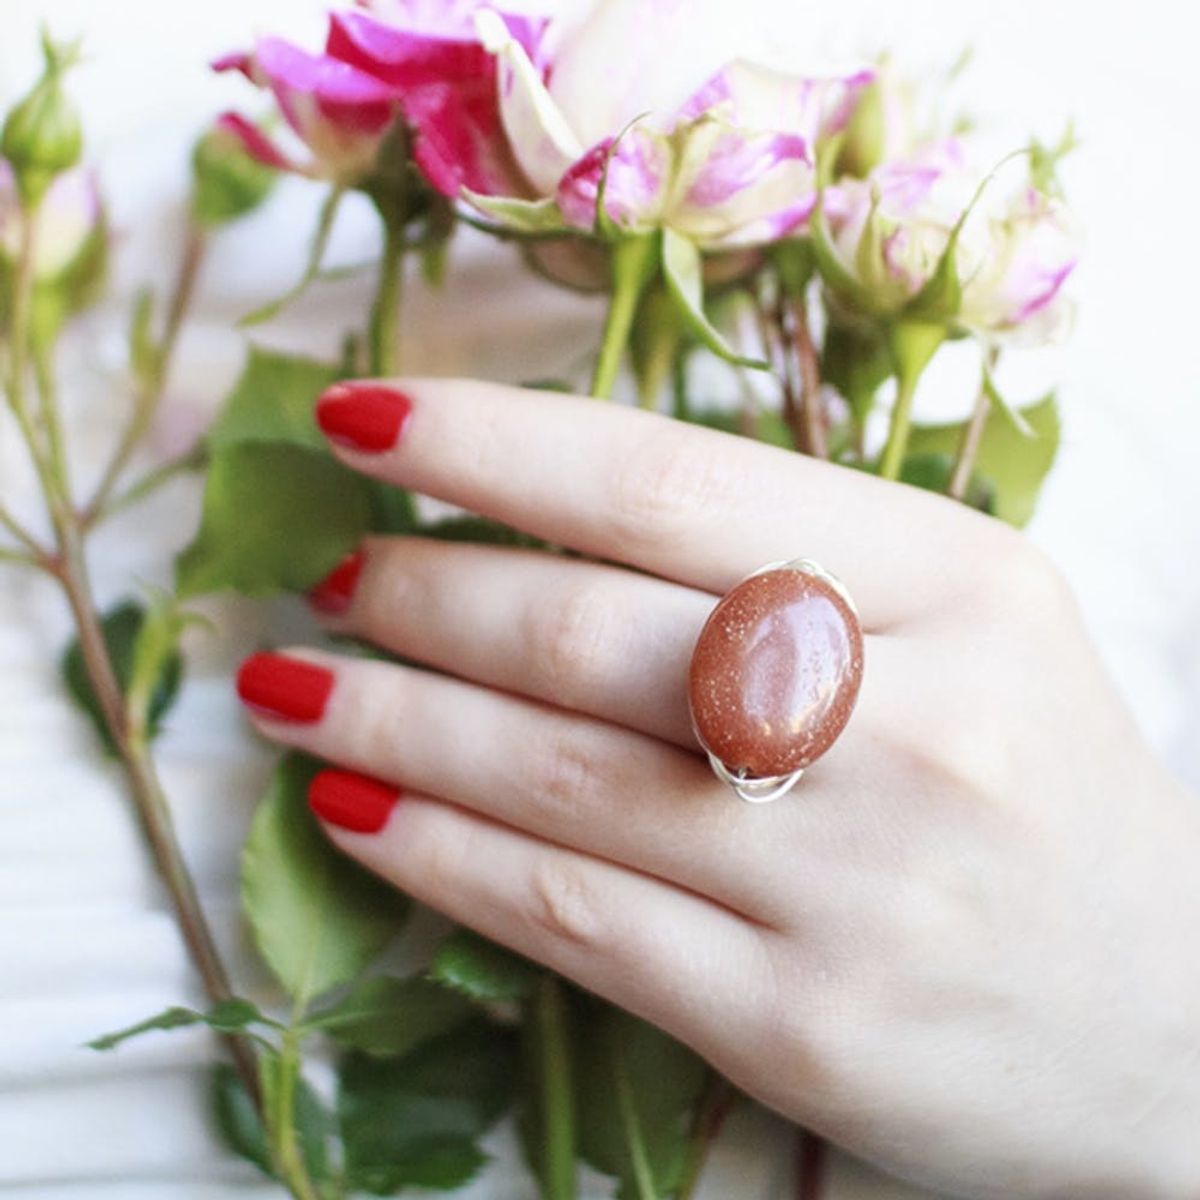 This Is the Number One Nail Polish, According to the Internet